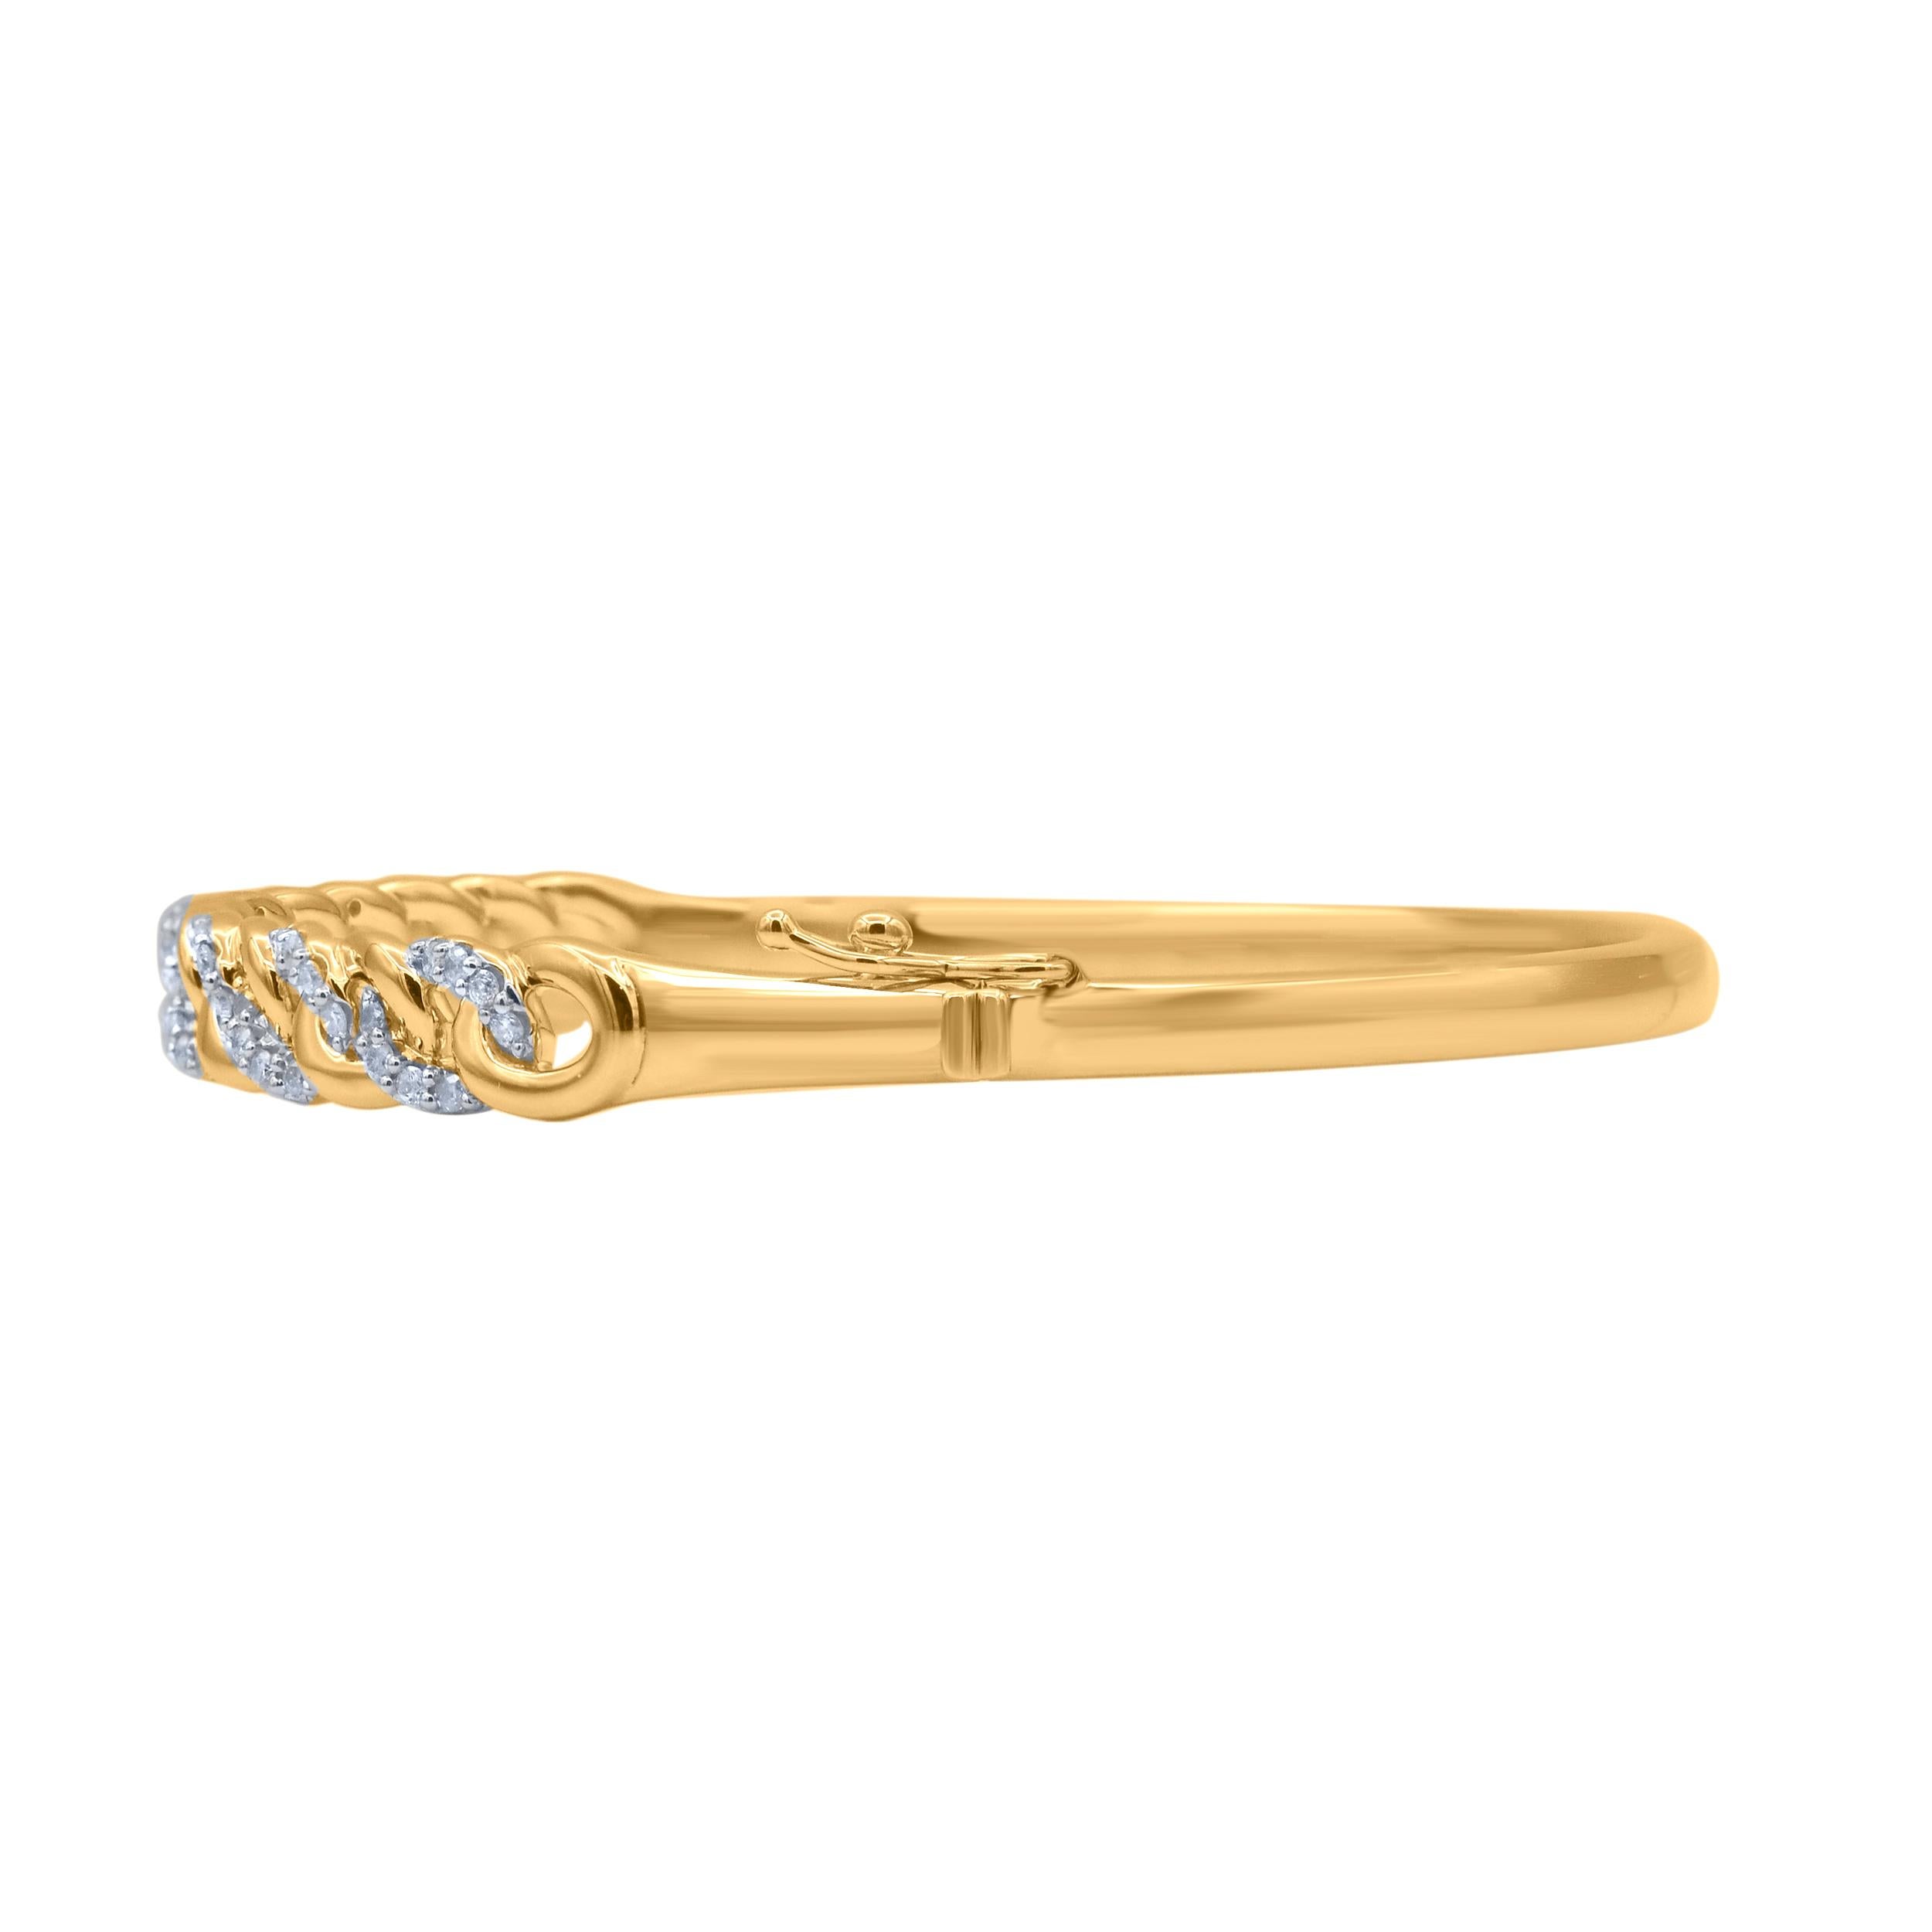 Turn heads with this eye-catching diamond bangle bracelet. This Interlink bangle bracelet features 56 natural round brilliant cut diamonds in prong setting and crafted in 14kt yellow gold. Diamonds are graded H-I color, I2 clarity. 
